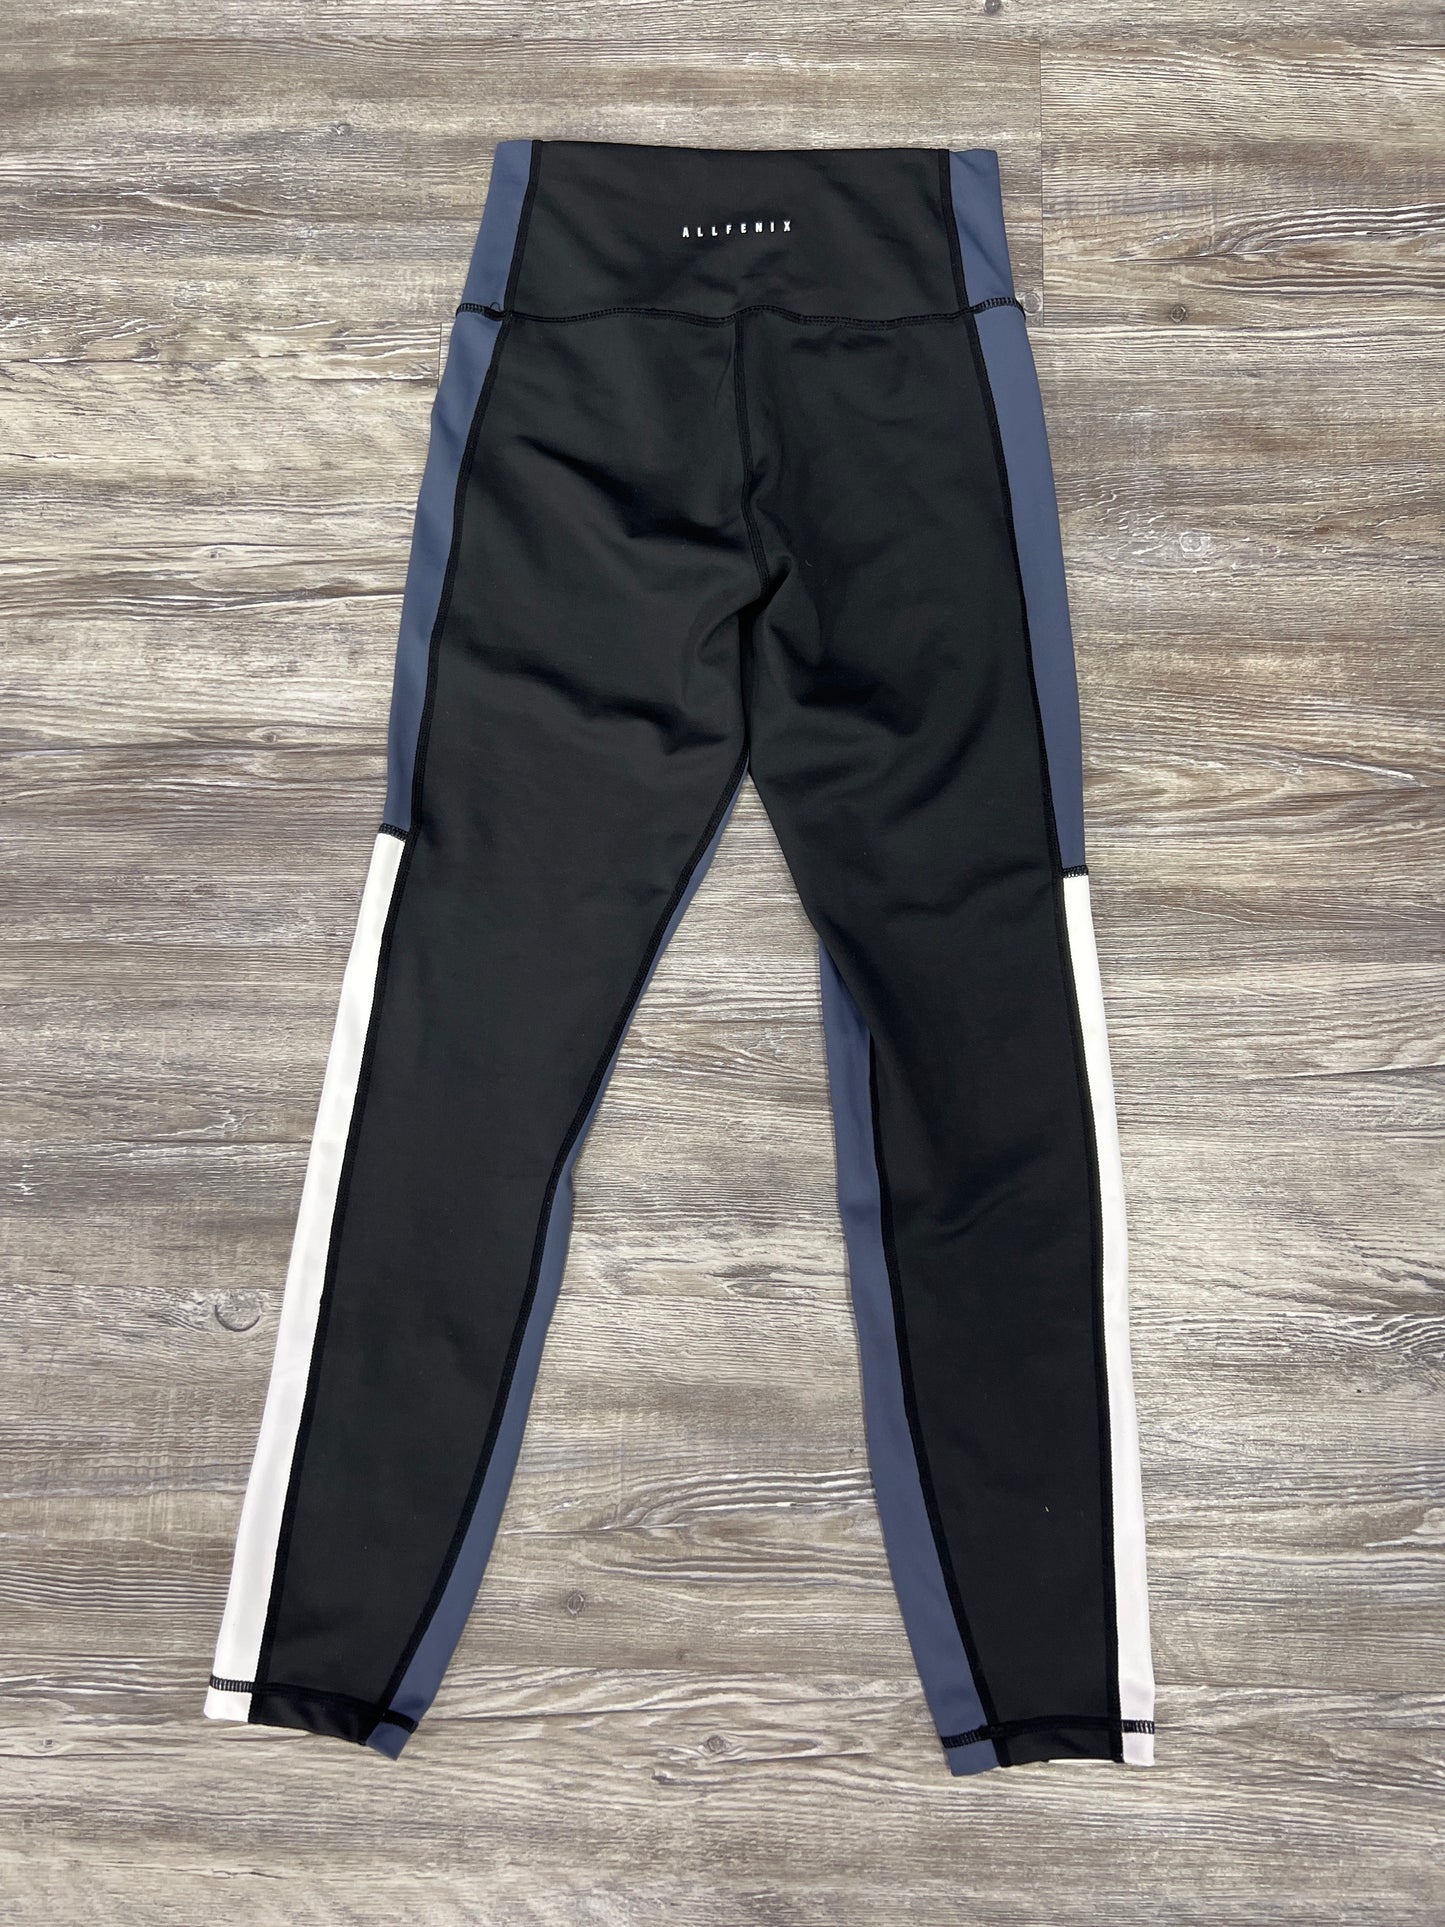 Athletic Leggings By Cmb  Size: S